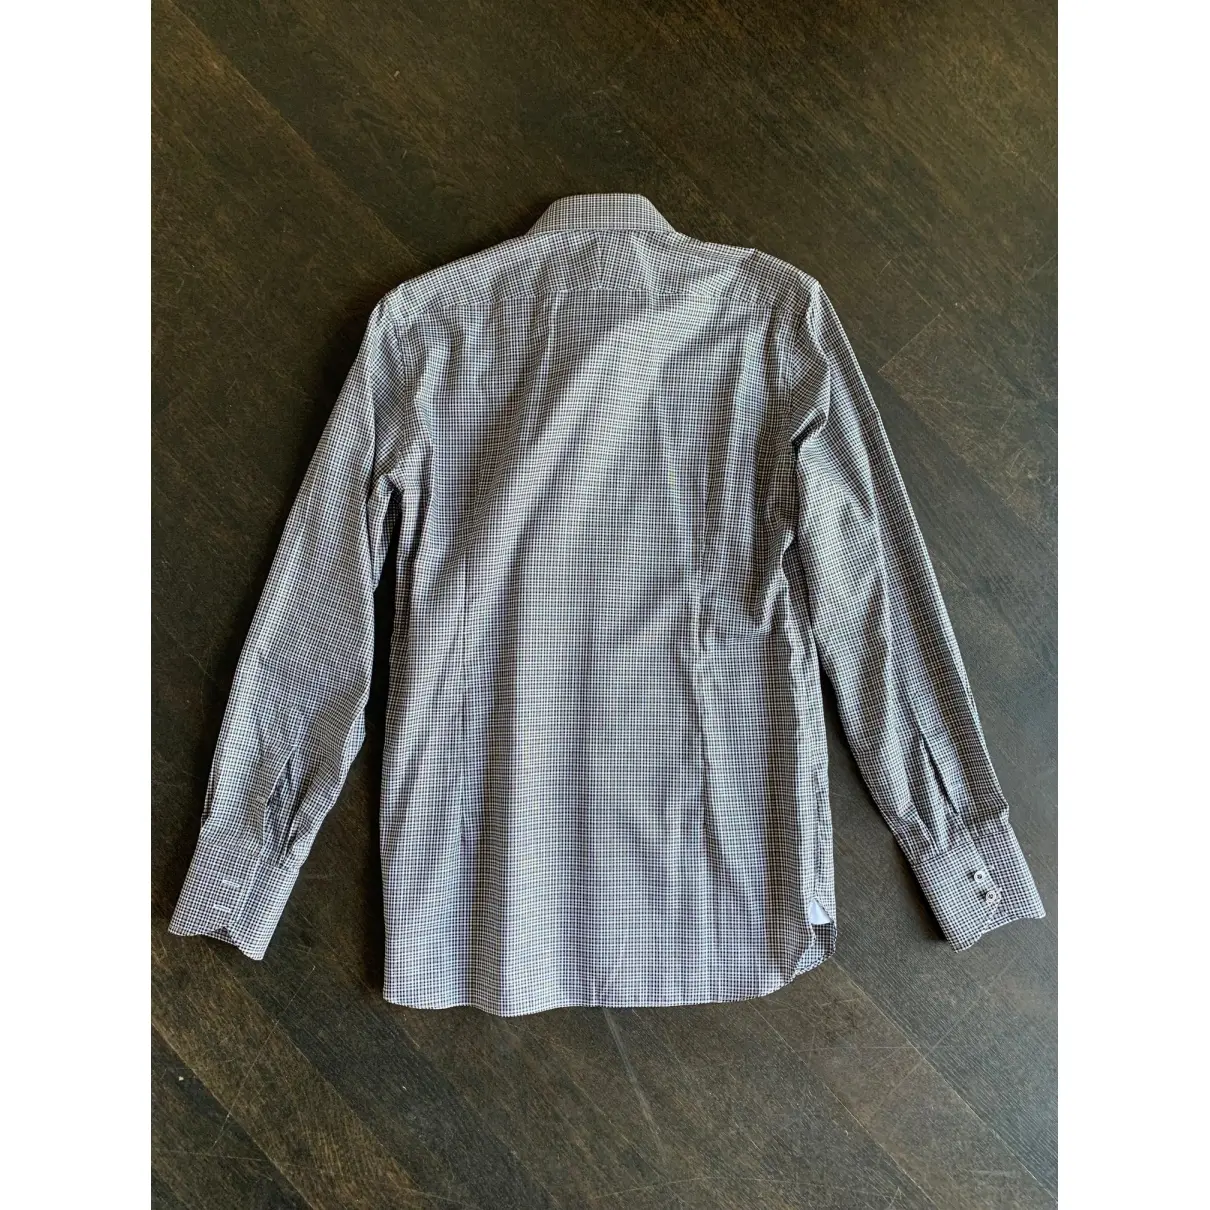 Tom Ford Shirt for sale